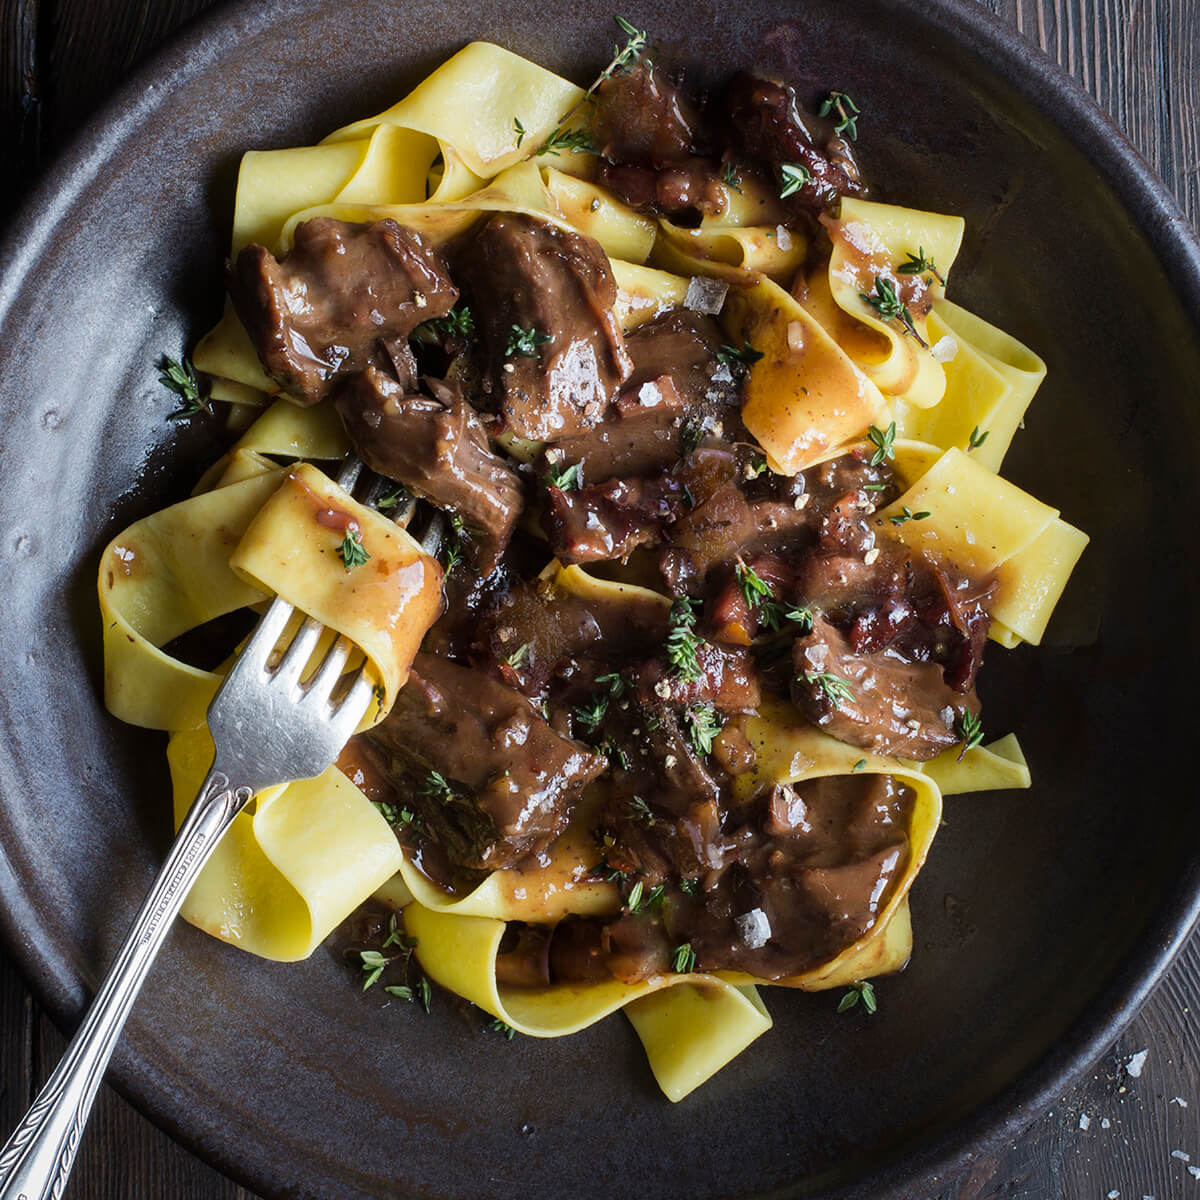 RAGOUT ON PAPPARDELLE